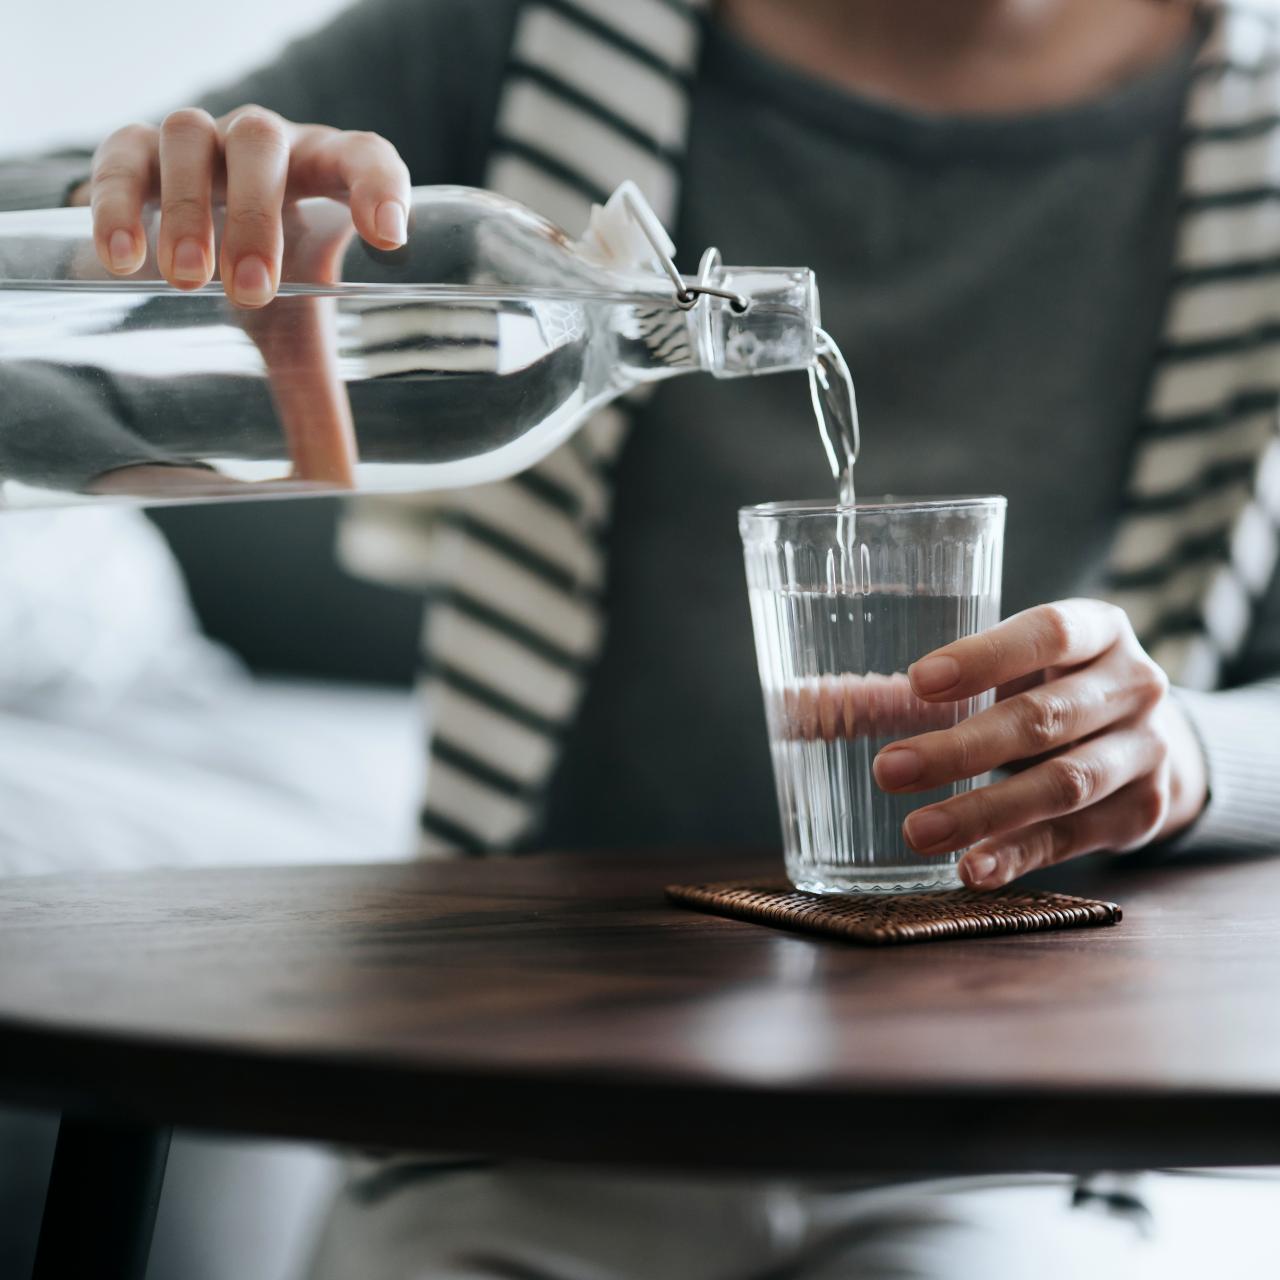 Bottle vs. tap: 7 things to know about drinking water